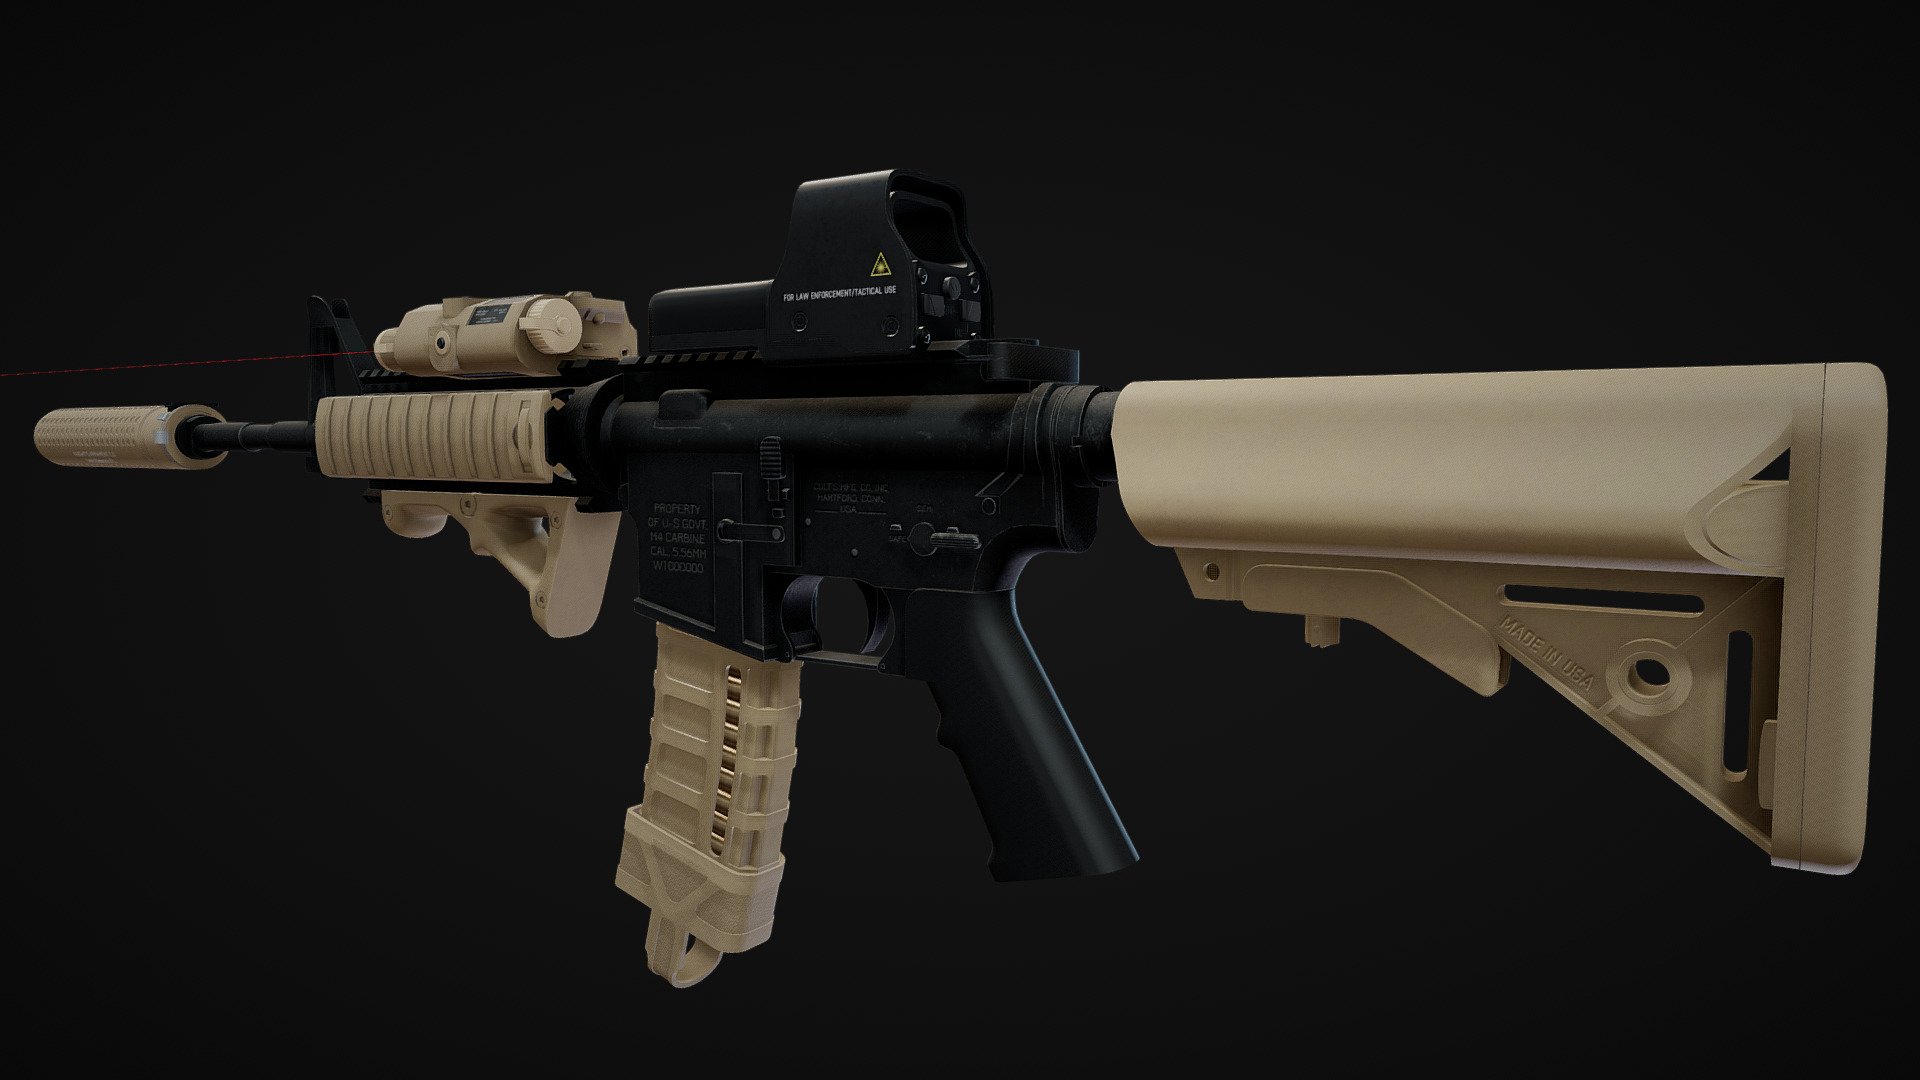 The M4 carbine is a 5.56×45mm NATO, gas-operated, magazine-fed, carbine developed in the United States during the 1980s. It is a shortened version of the M16A2 assault rifle.

The M4 is extensively used by the United States Armed Forces, with decisions to largely replace the M16 rifle in United States Army (starting 2010) and United States Marine Corps (USMC) (starting 2016) combat units as the primary infantry weapon and service rifle. The M4 has been adopted by over 60 countries worldwide, and has been described as &ldquo;one of the defining firearms of the 21st century